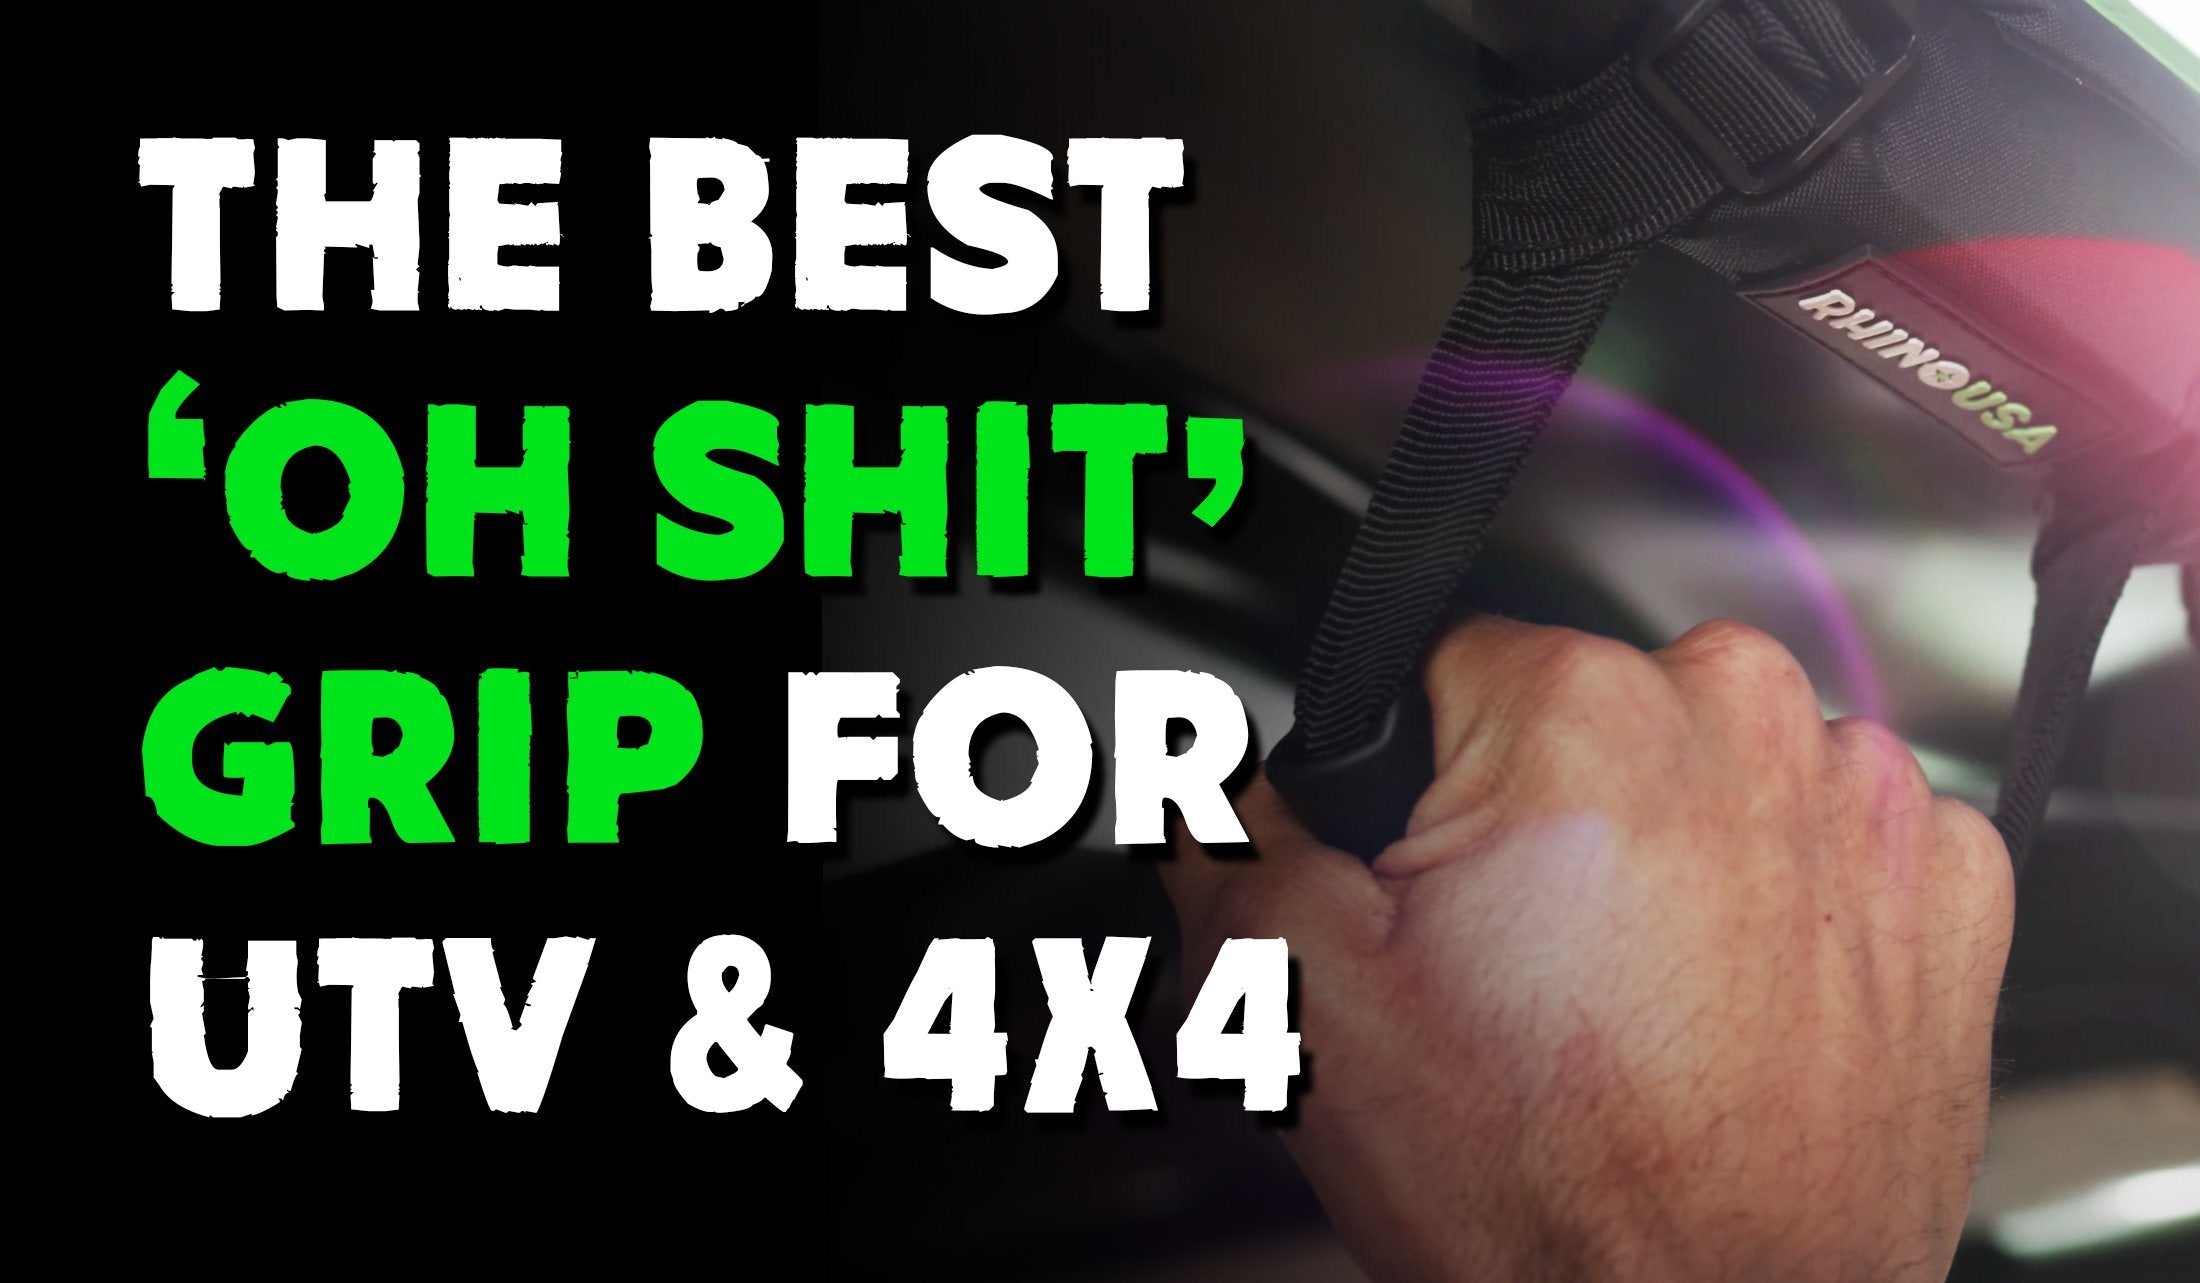 The best ‘Oh Shit’ grip and grab handle money can buy for your UTV or 4X4!